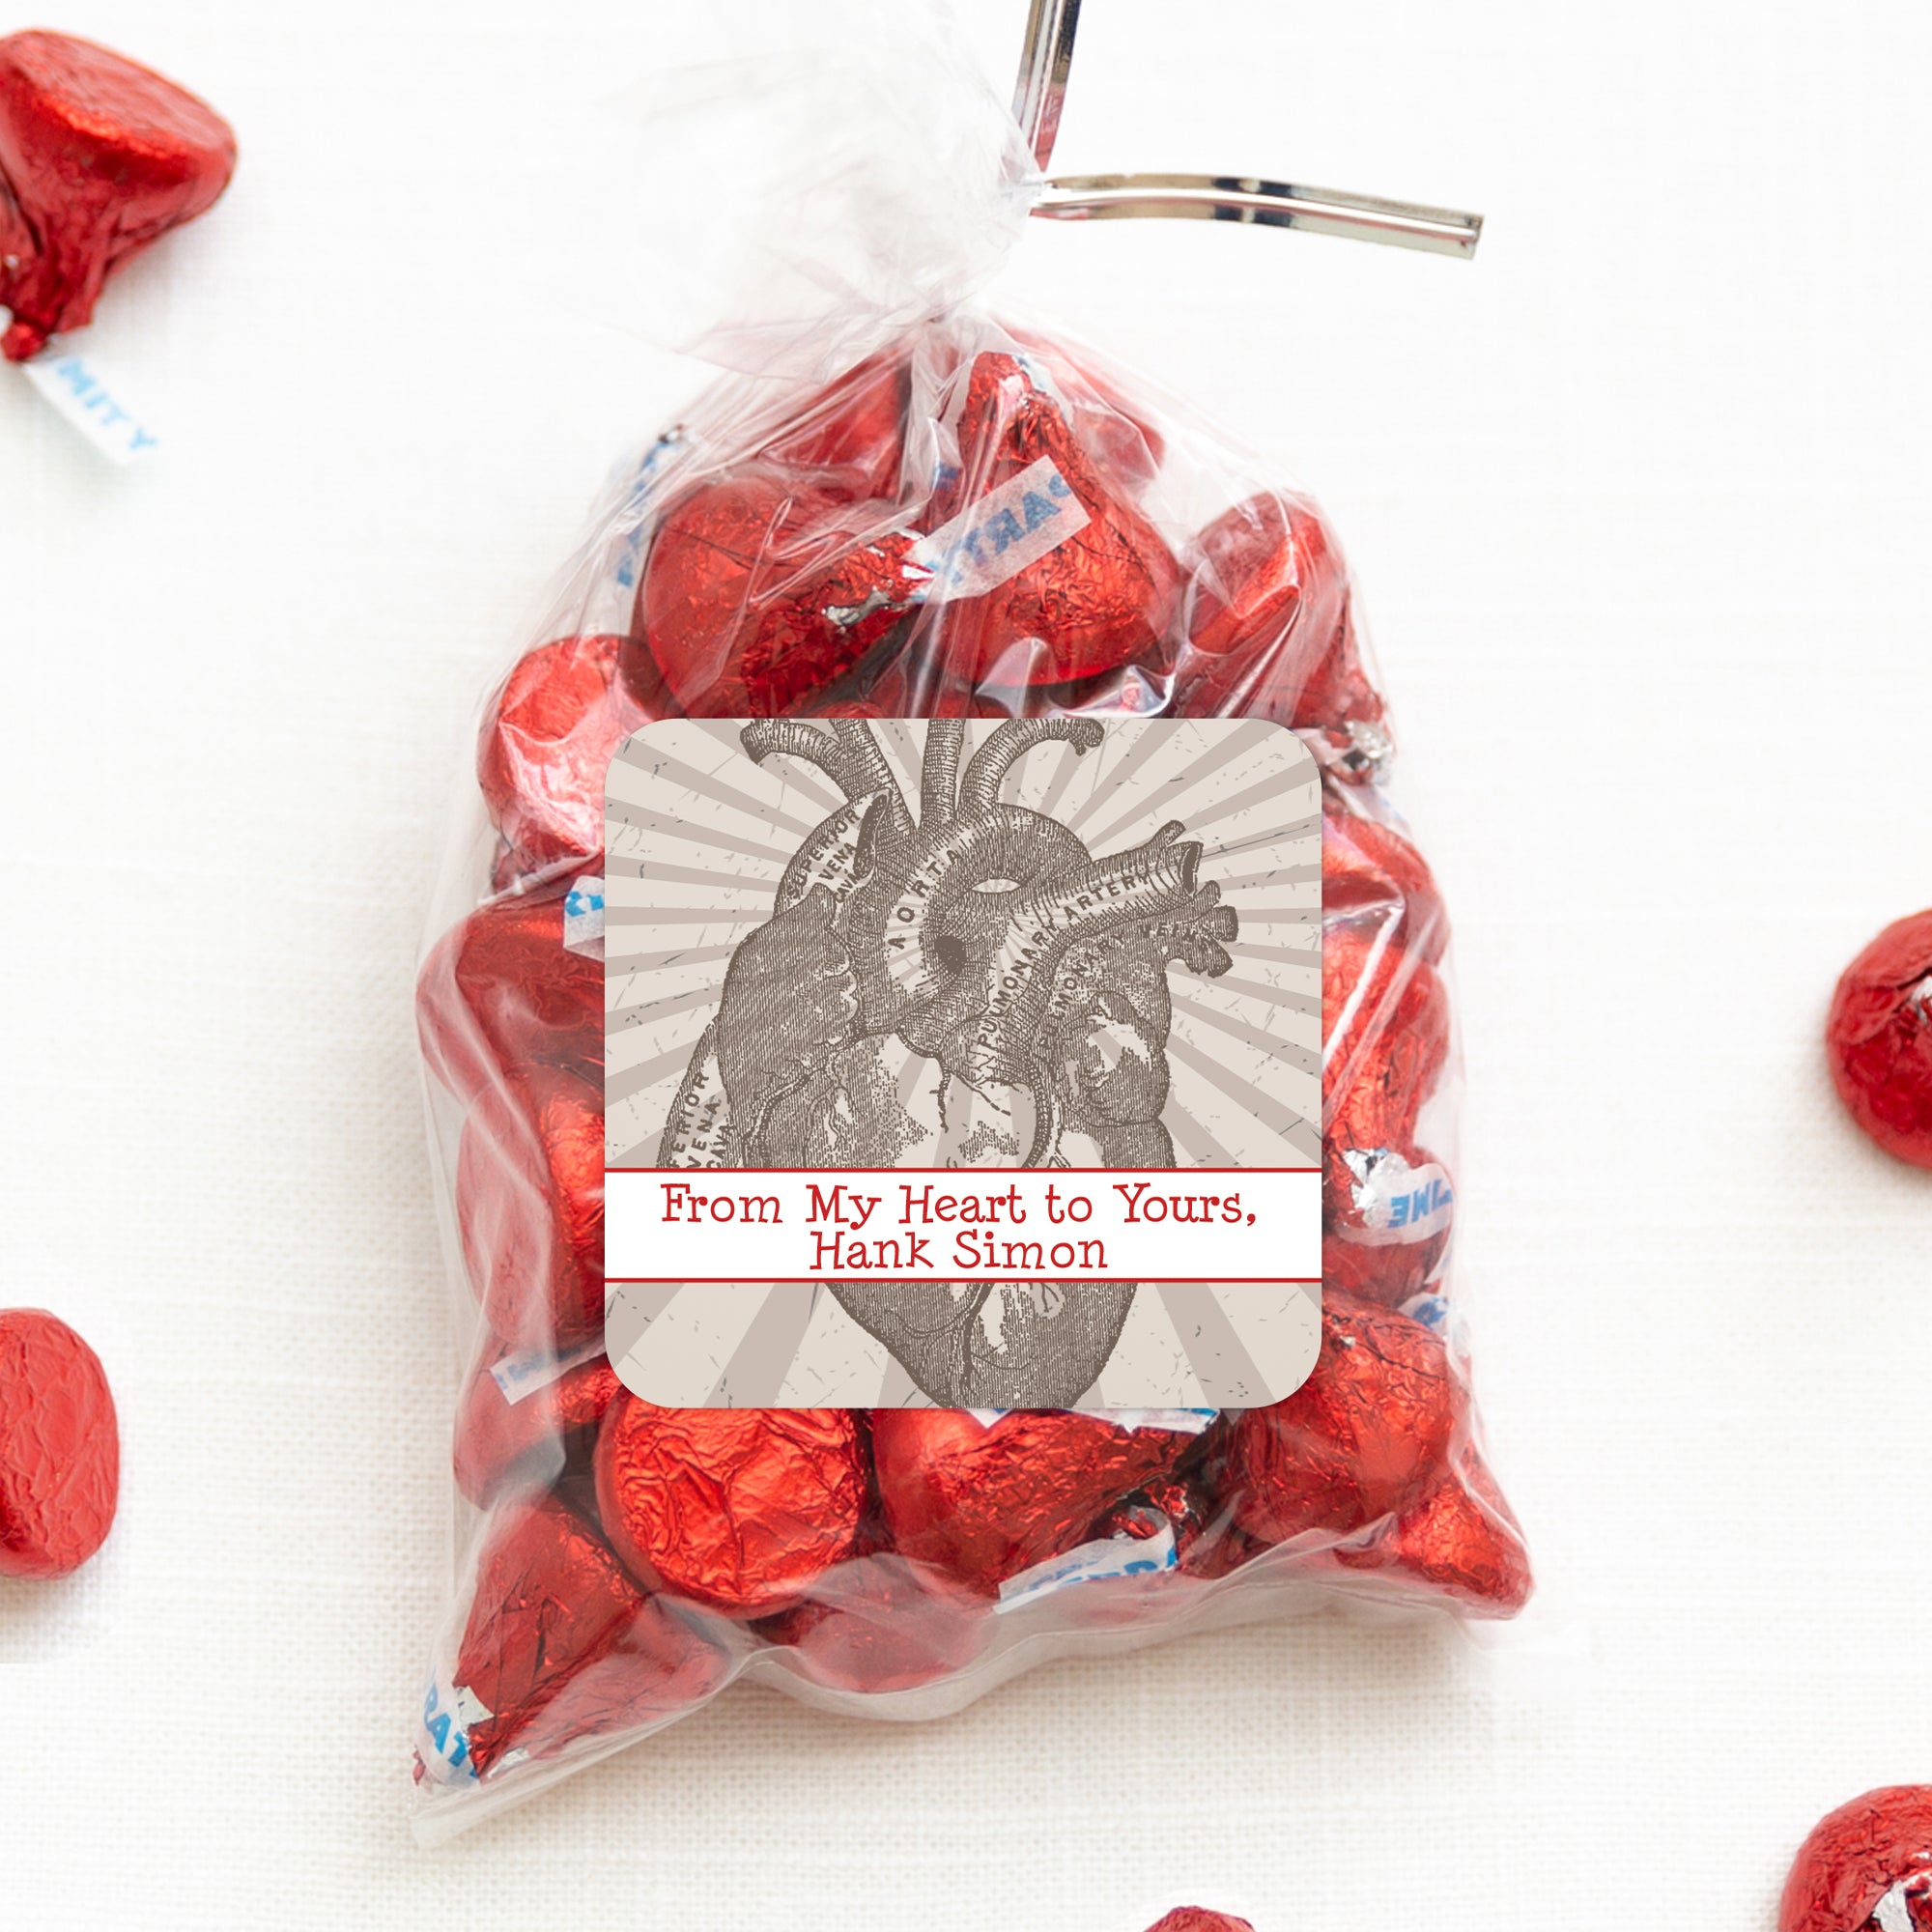 Vintage anatomy of the heart.  Personalized square 2.5" sticker for candy bag. PIPSY.com